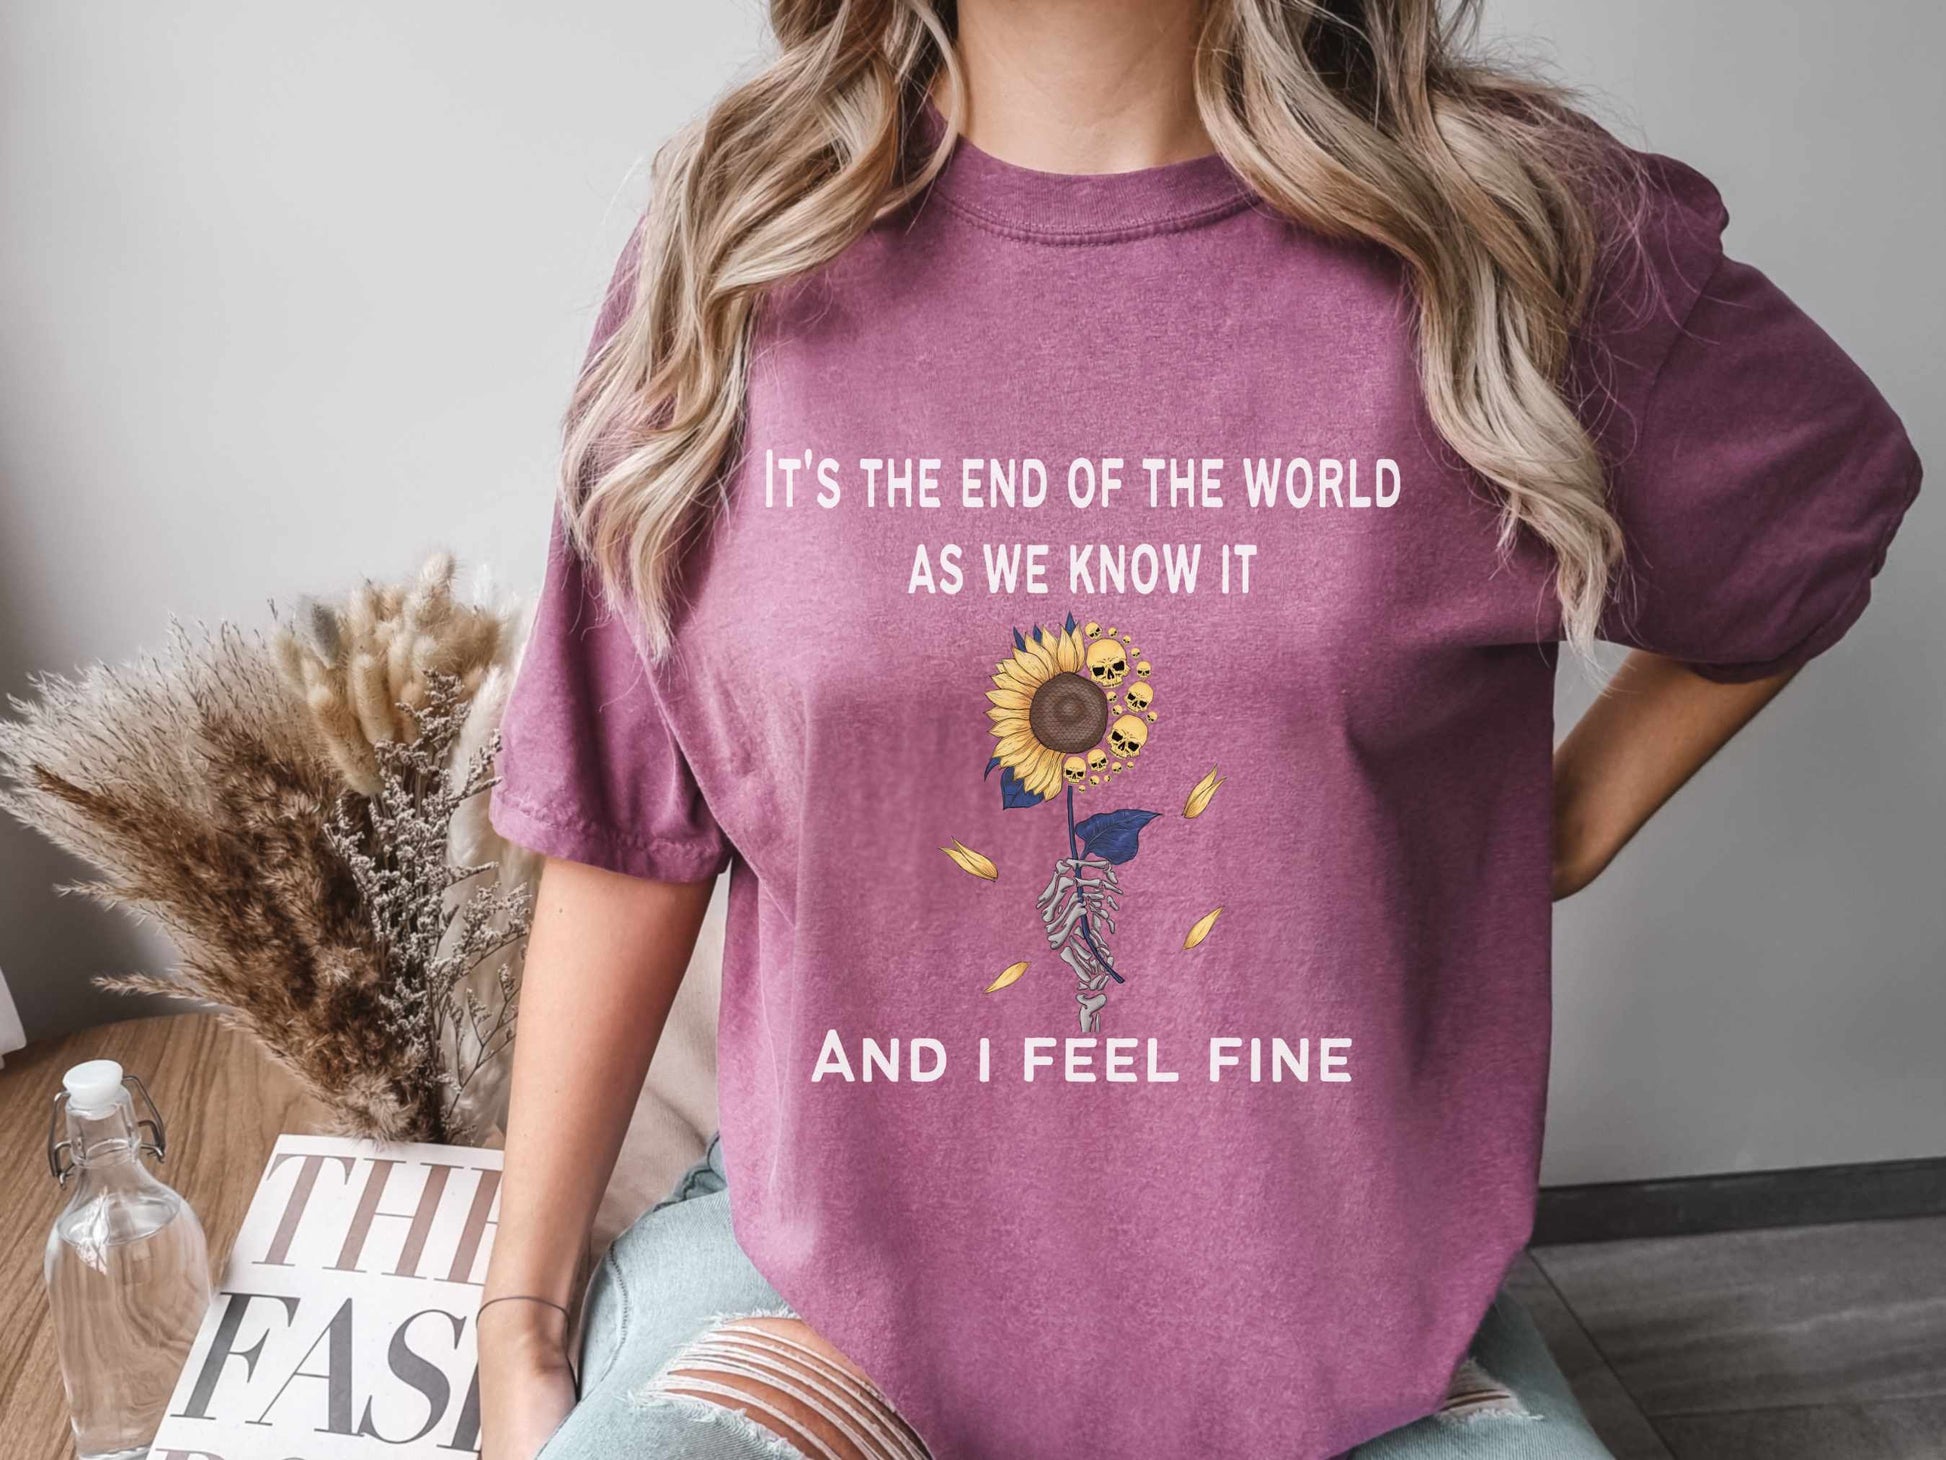 R.E.M."End of World" Graphic T-Shirt in Berry